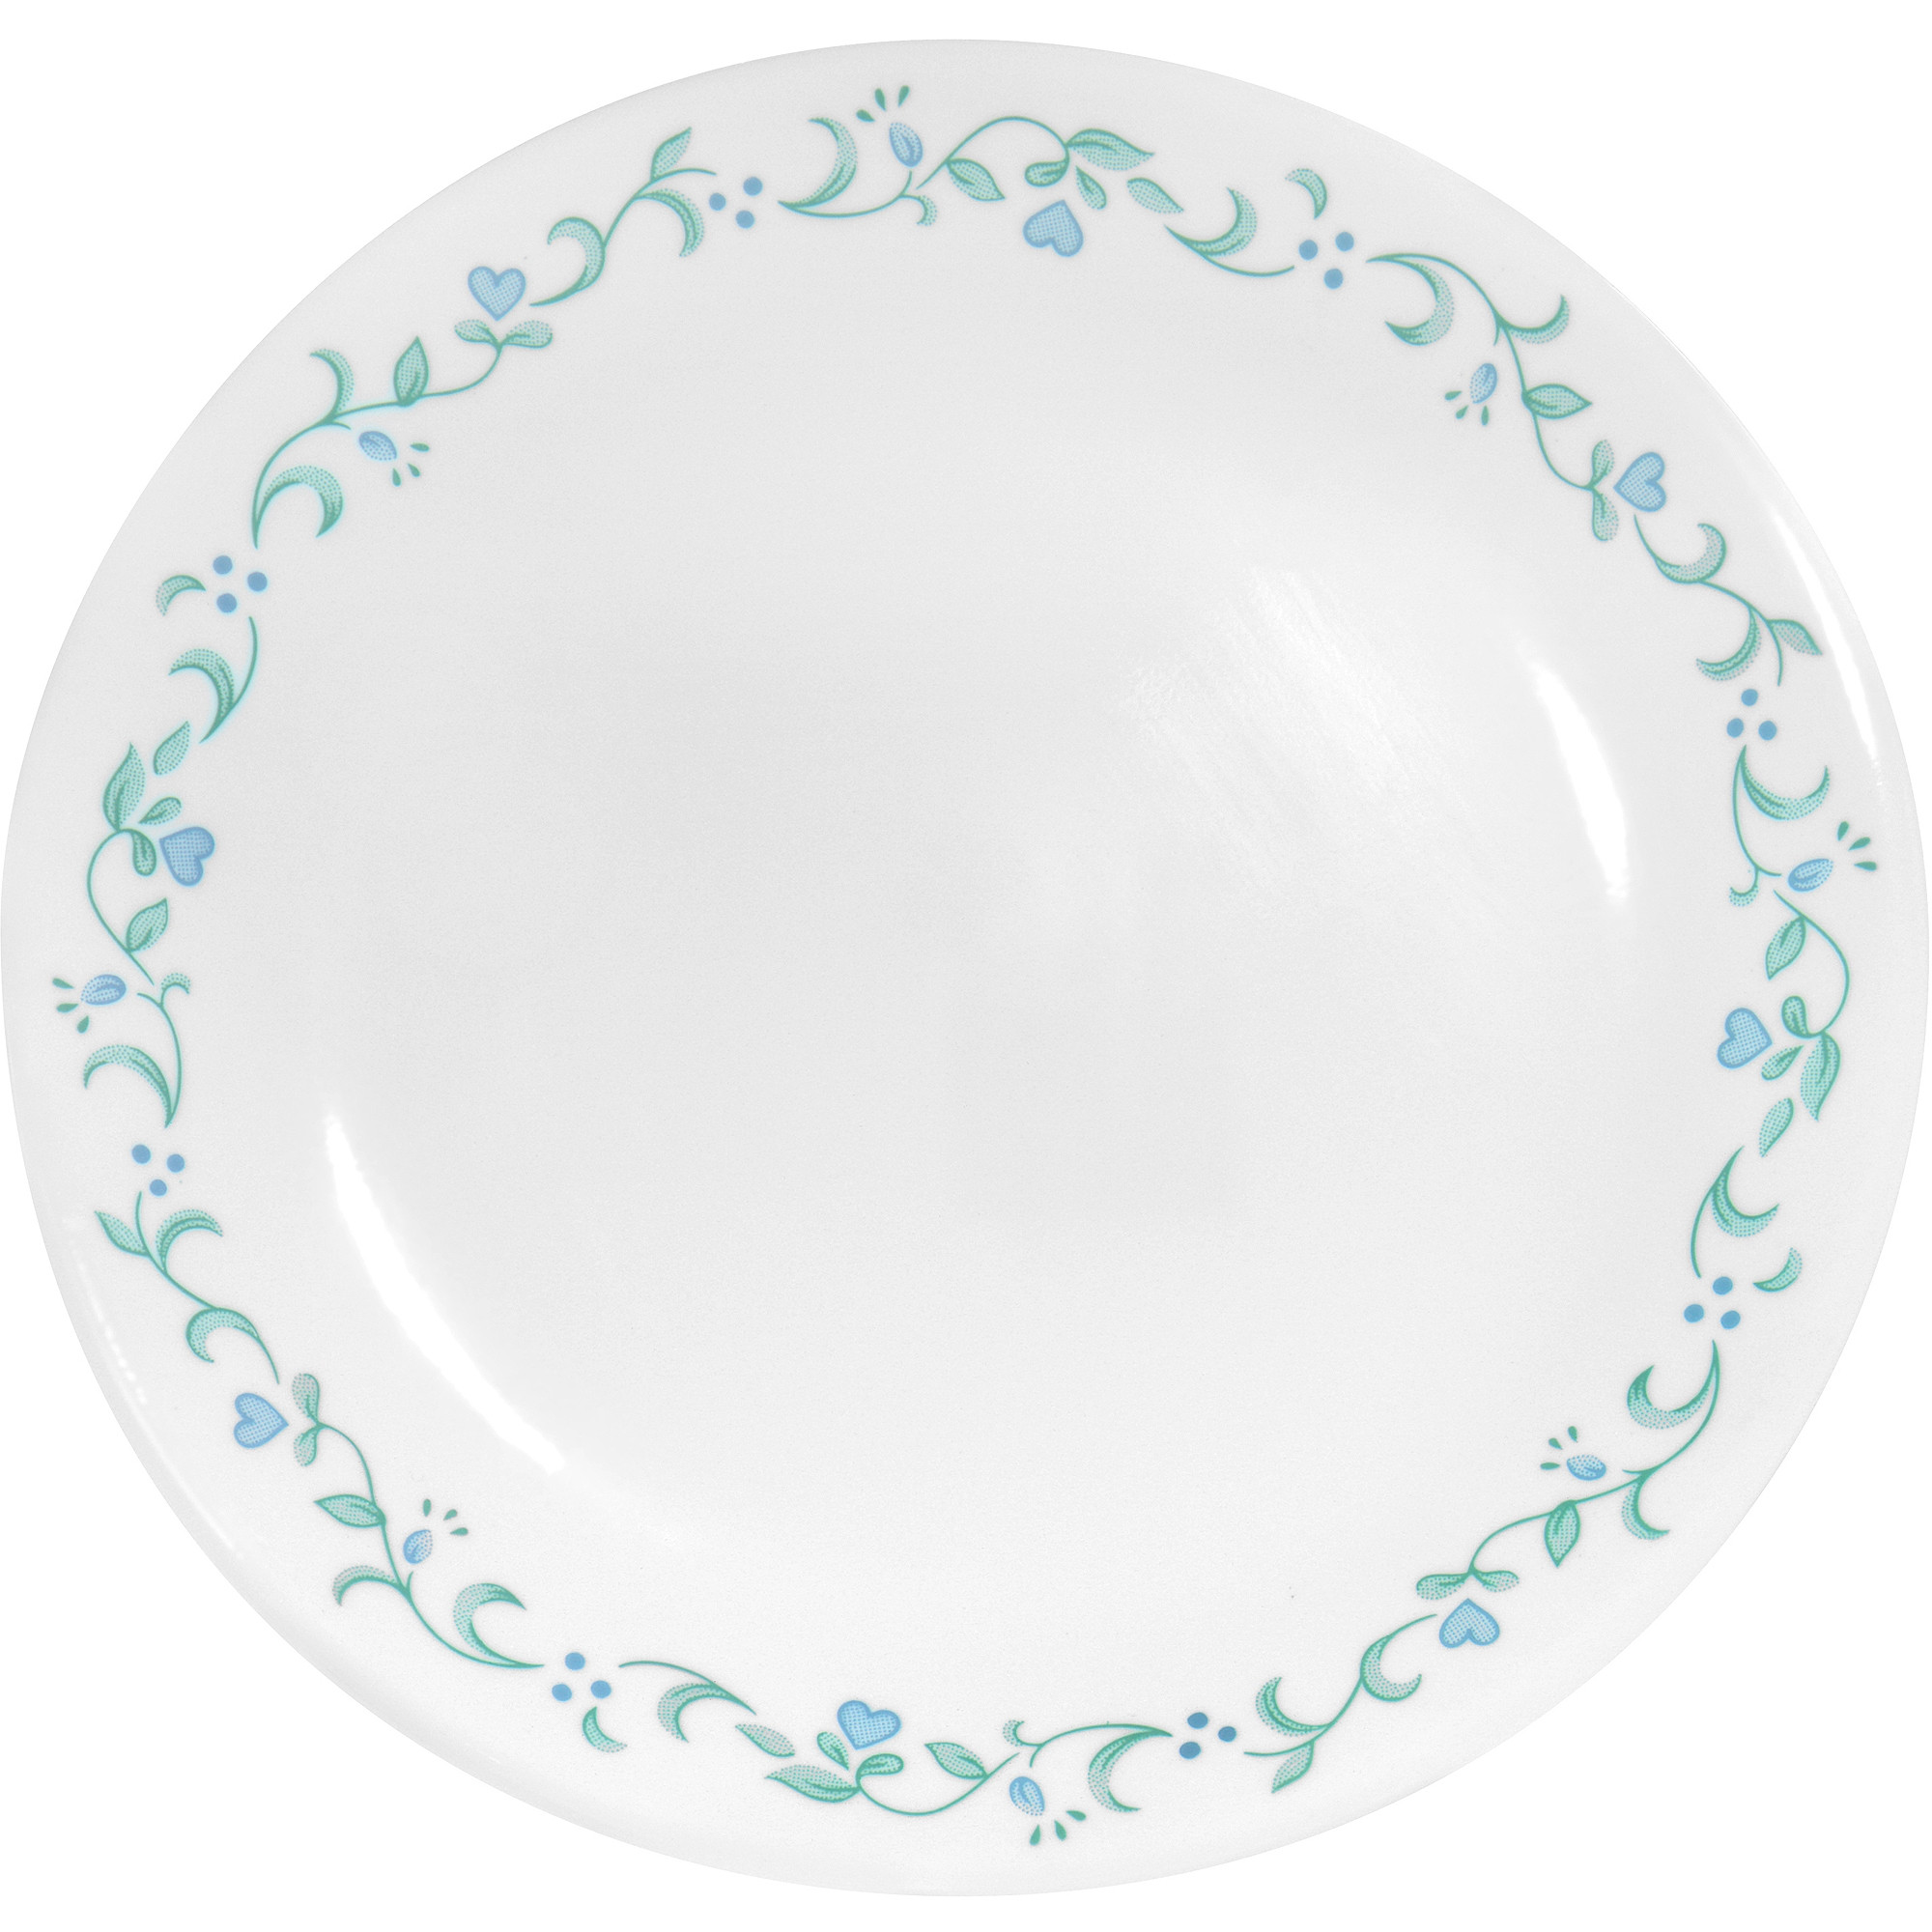 Walmart Dinner Plates
 The Pioneer Woman Farmhouse Lace Dinner Plate Set 4 Pack